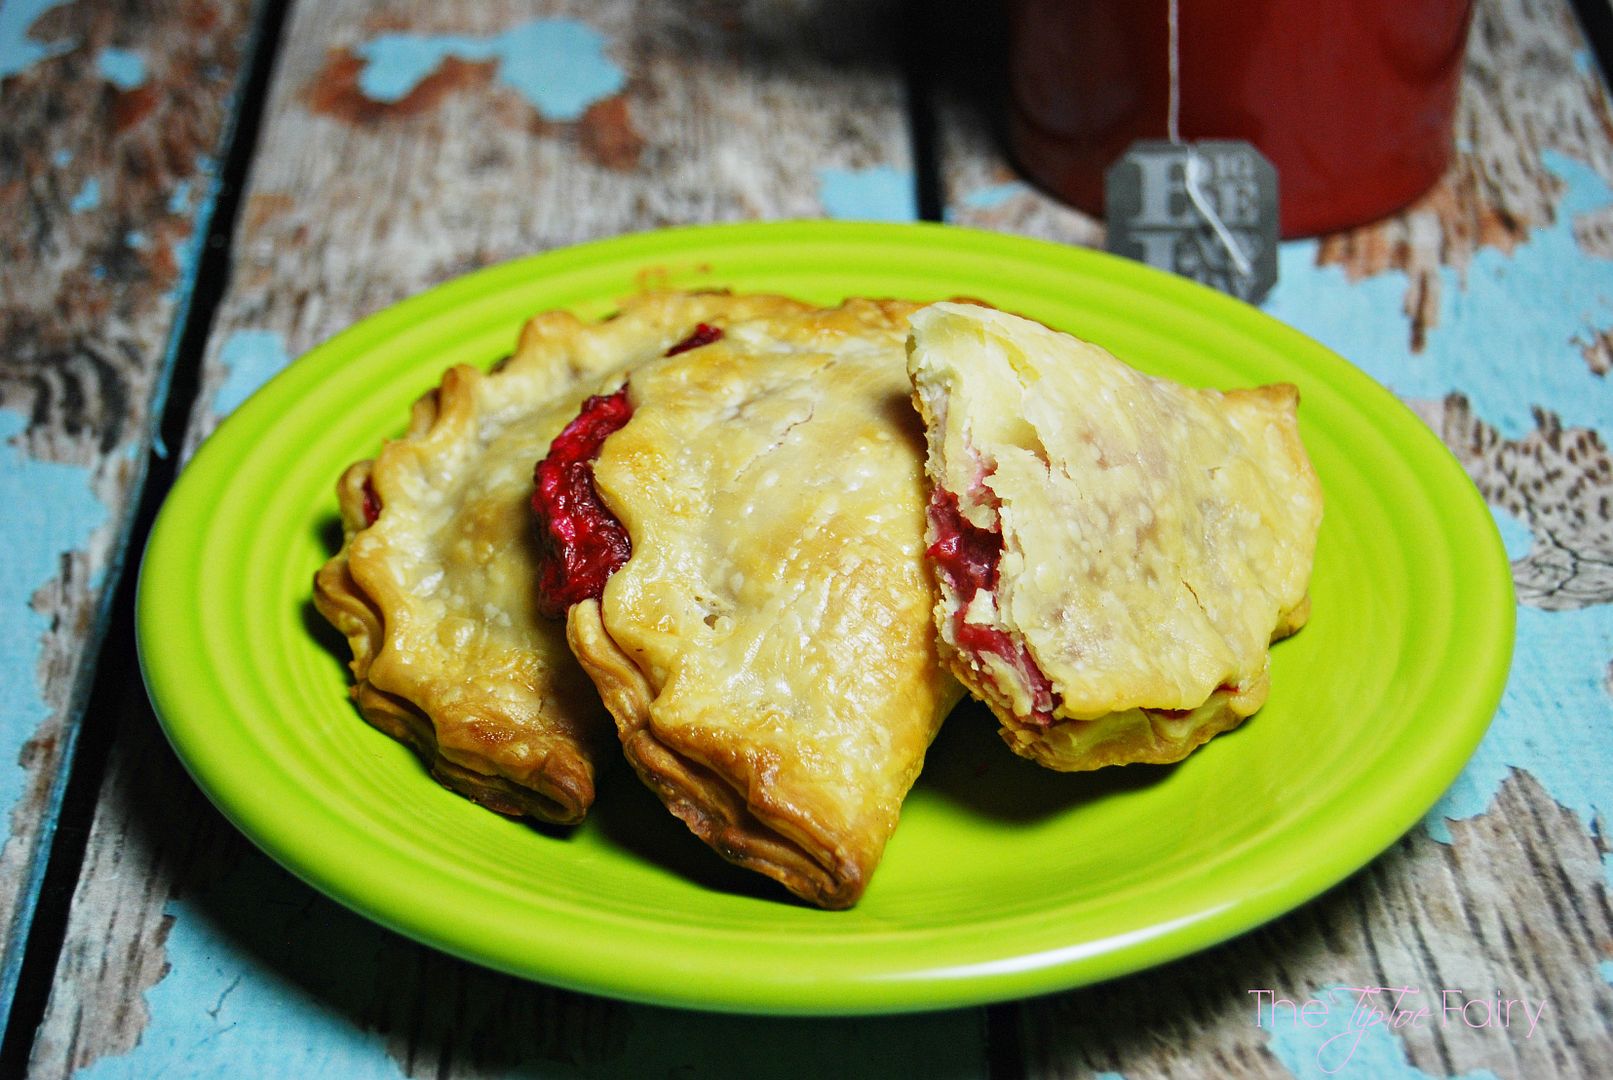 Smashed Raspberry Cream Cheese Hand Pies - a delicious dessert made with Truvia® and perfect with a cup of Bigelow tea | The TipToe Fairy #ad #SweetWarmUp #pierecipe